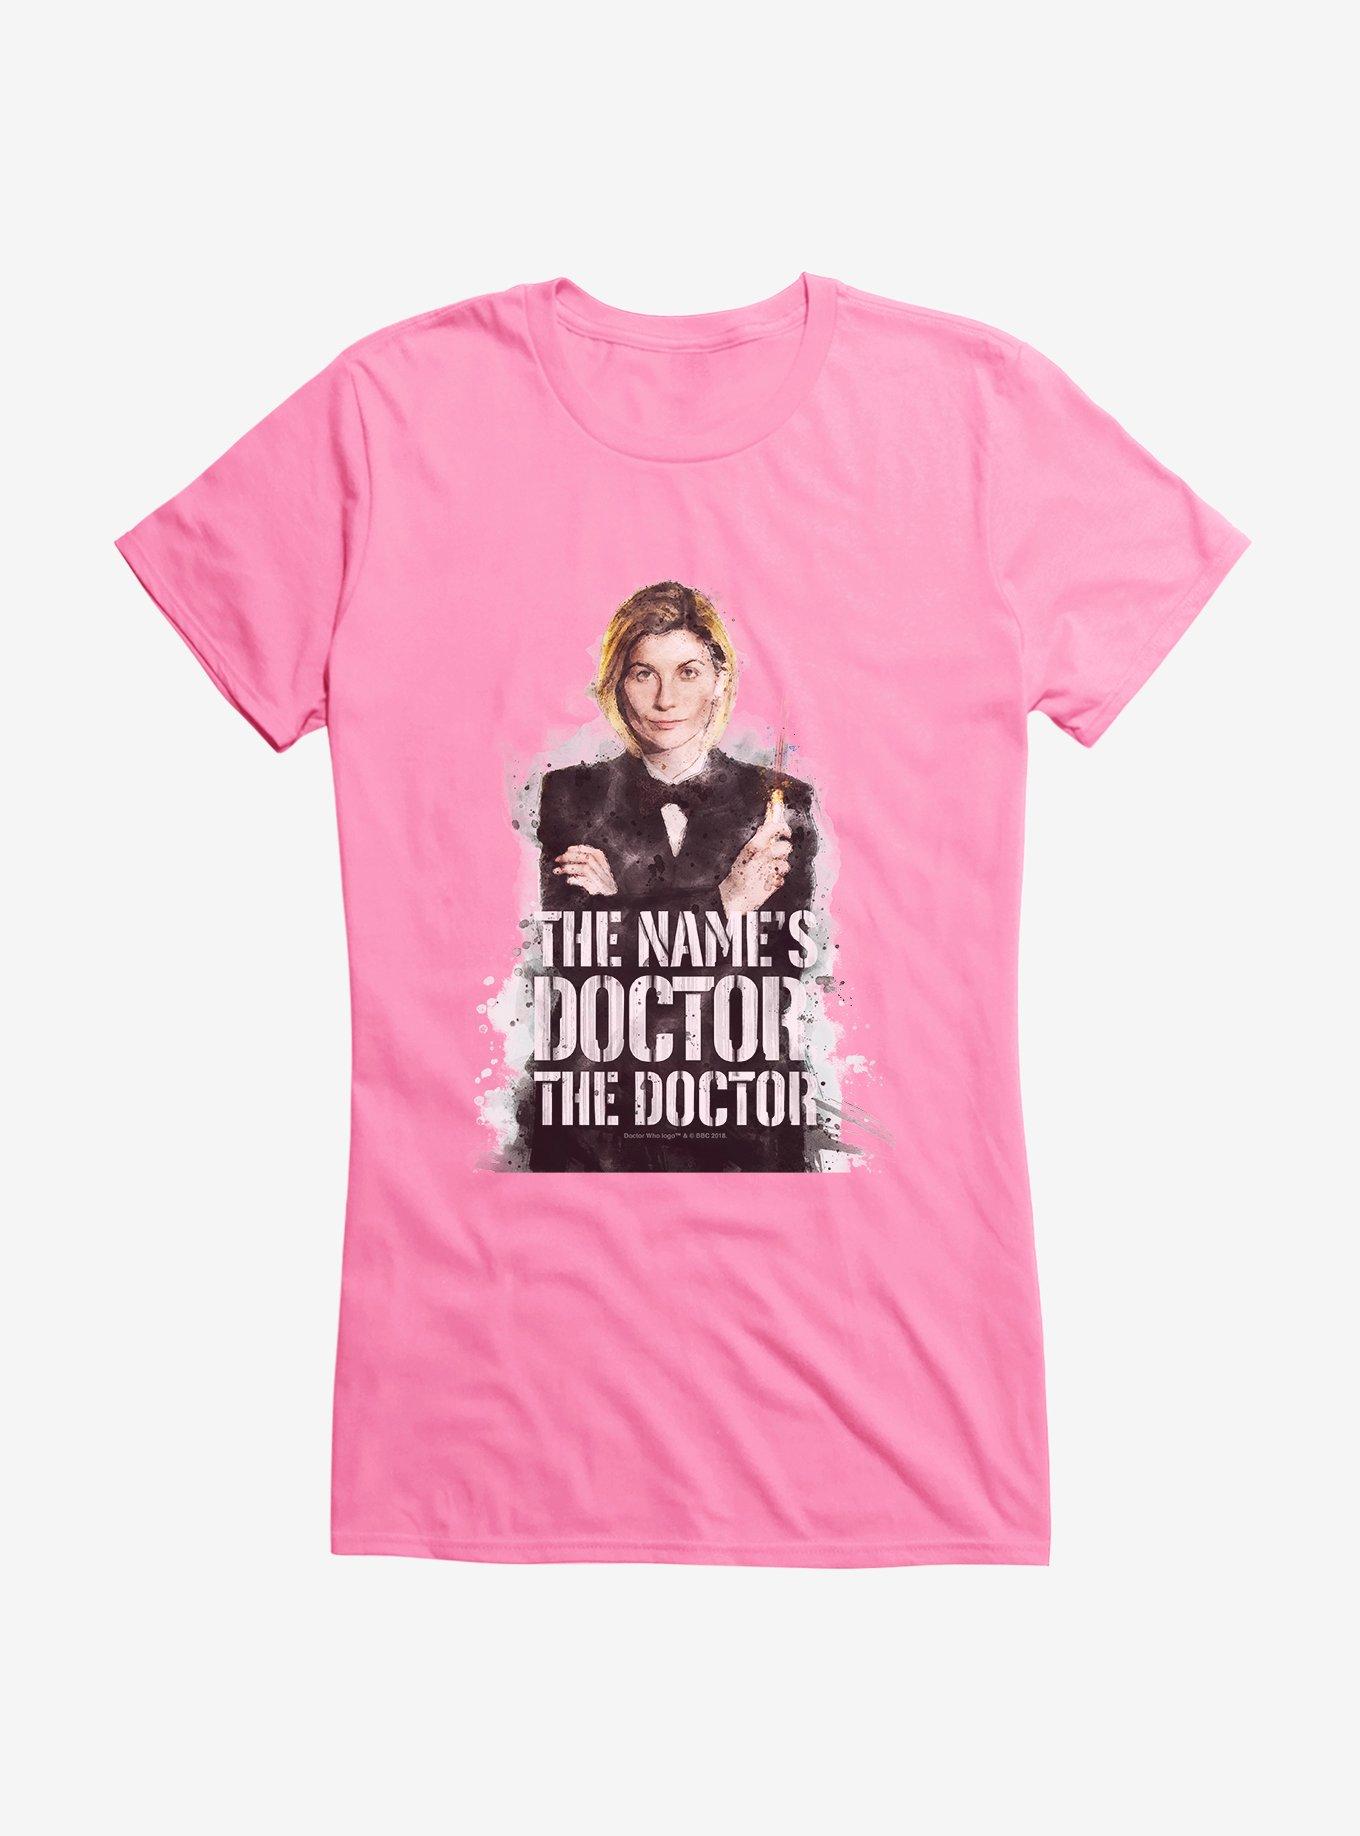 Shop Doctor Who Tees